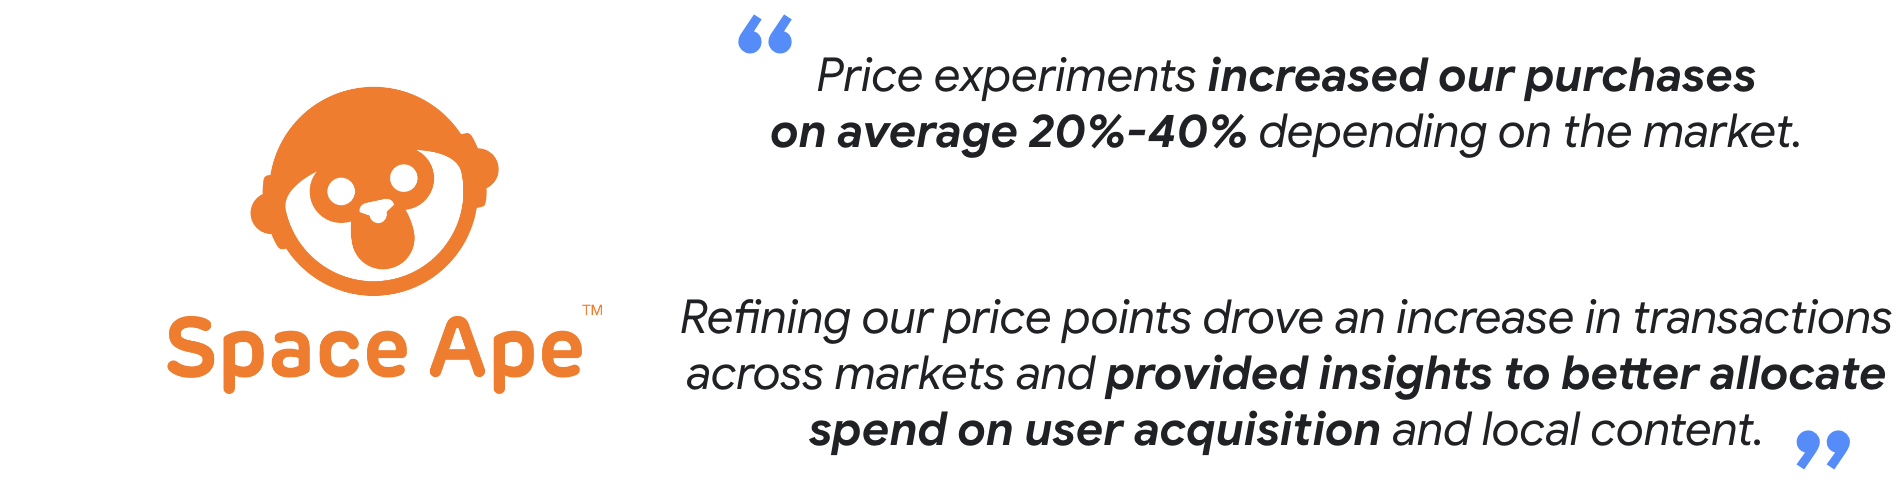 Image of the Space Ape logo with text reads, 'Price experiments increased our purchases on average 20%-40% depending on the market. Refining our price points drove an increare in tgransations across markets and provided insights to better allocate spend on user acquisition and local content'